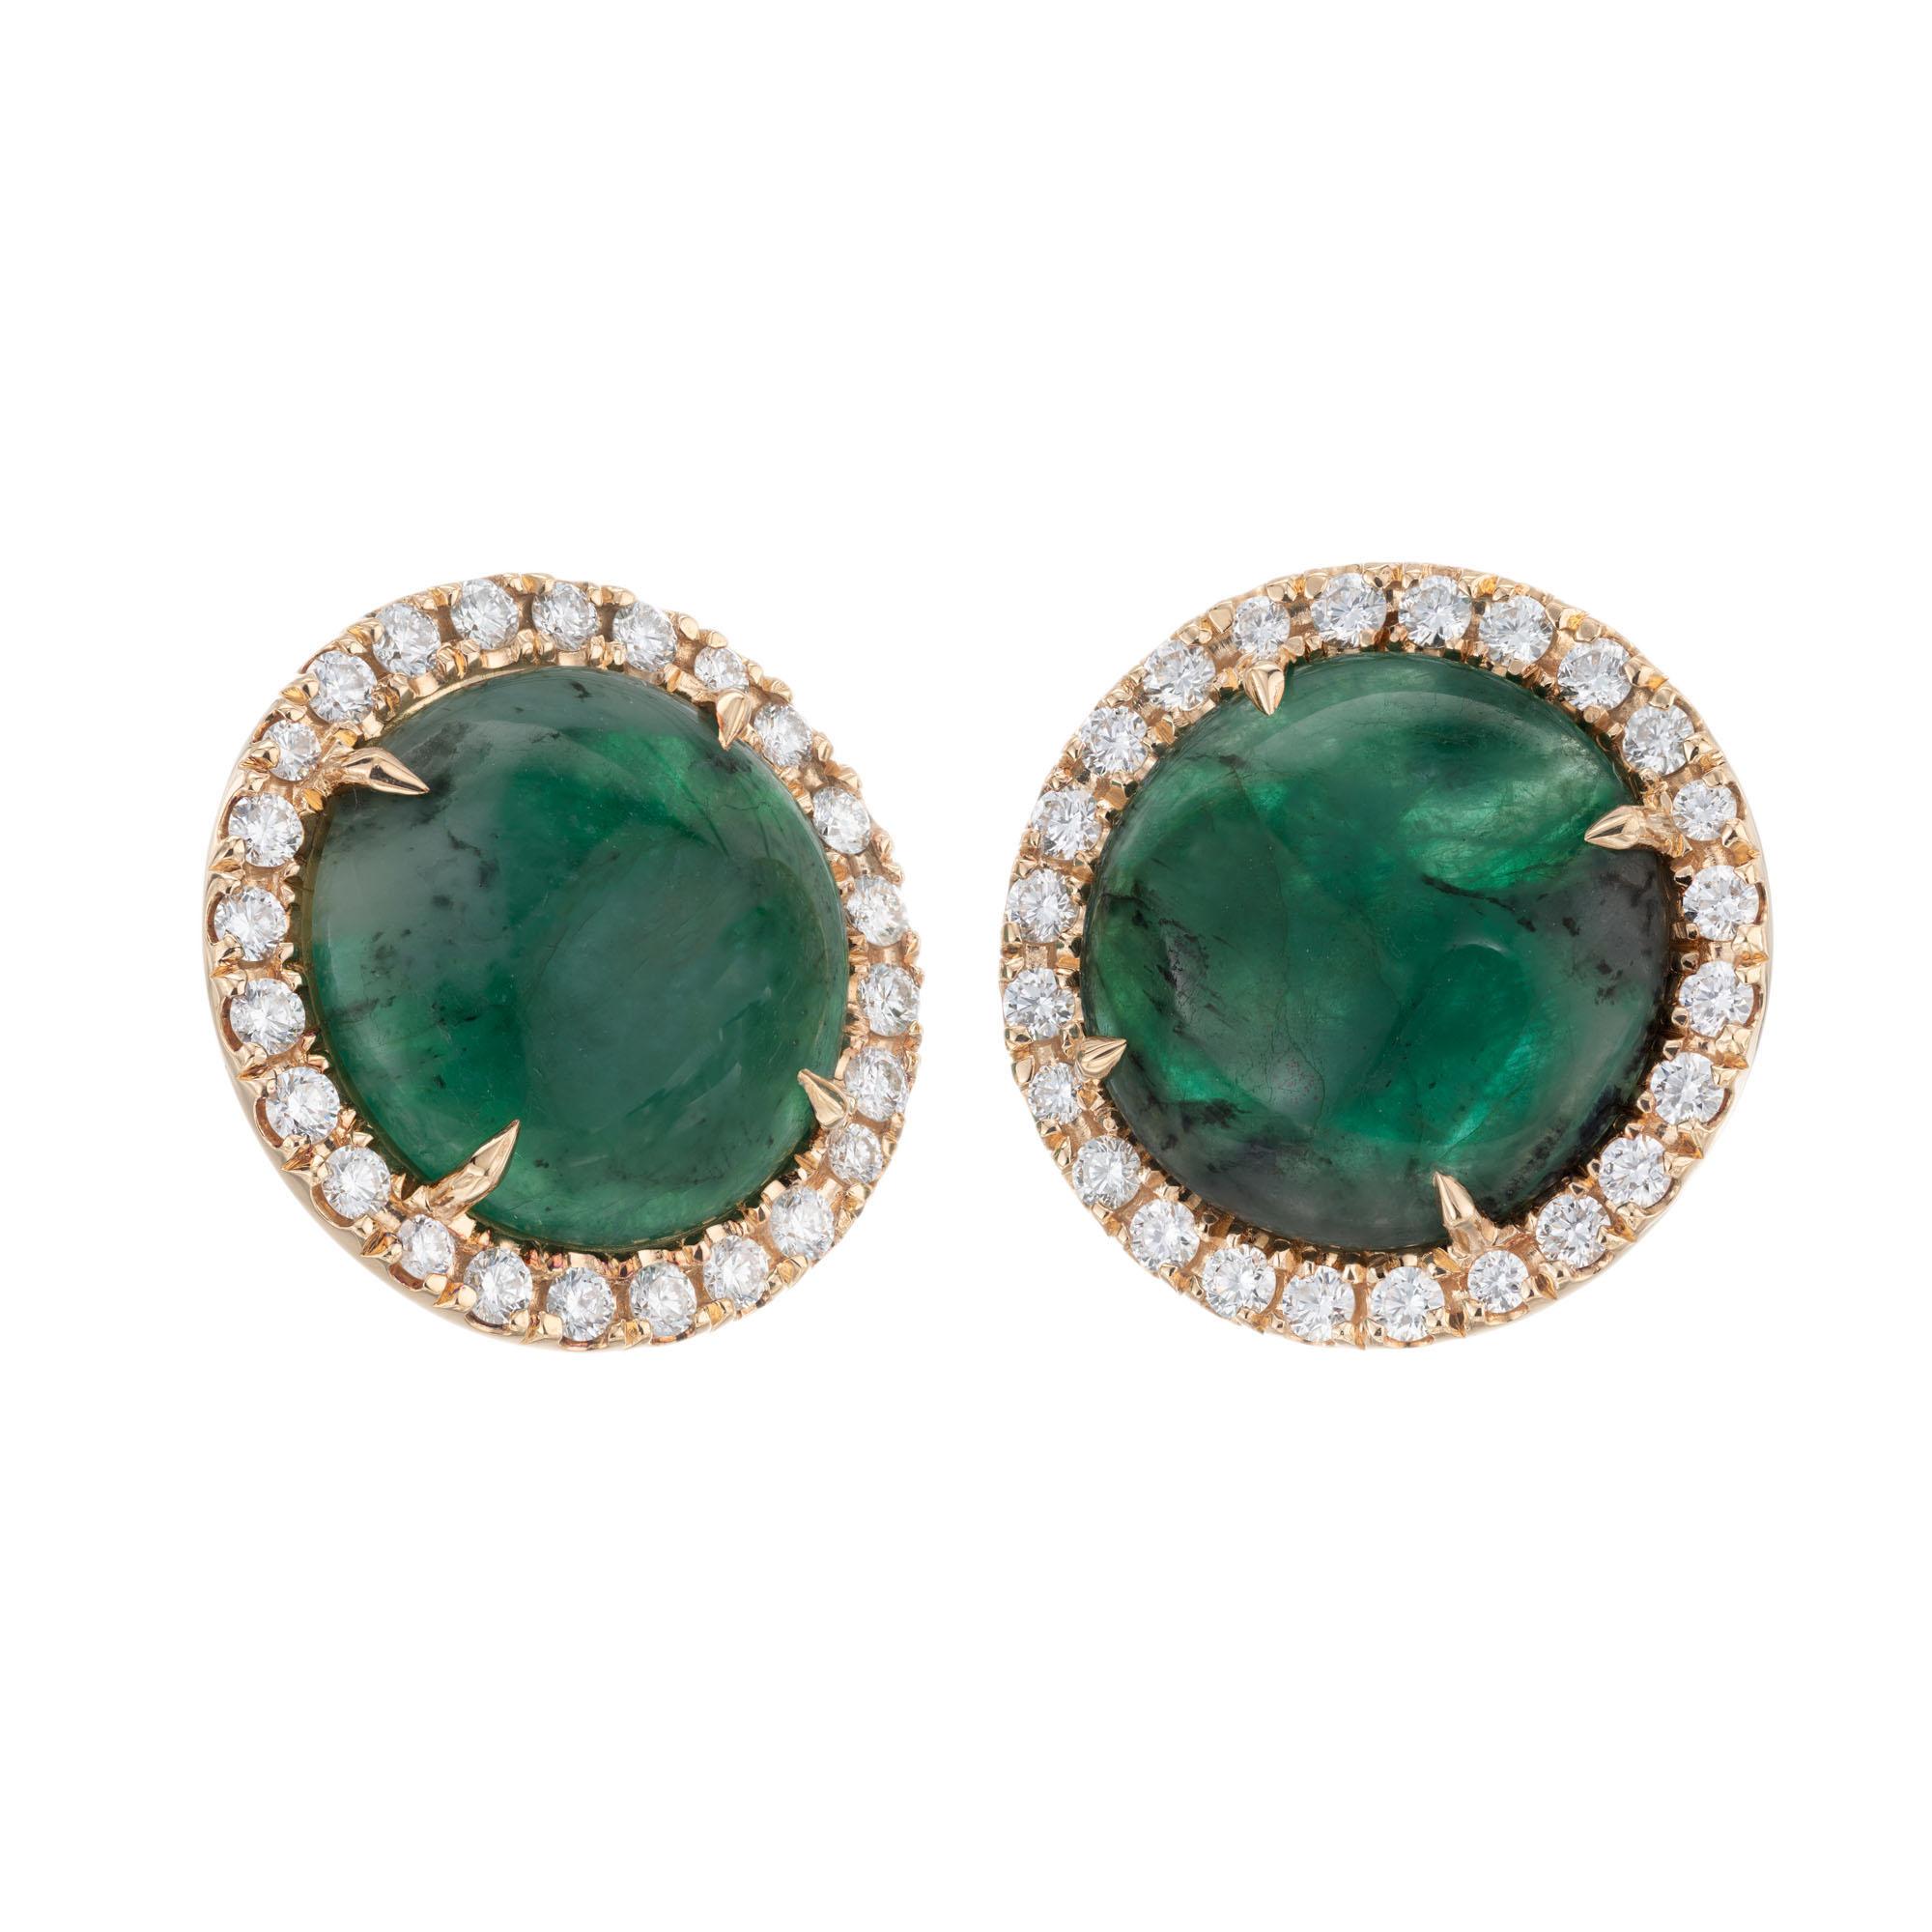 Round emerald and diamond earrings. GIA certified natural untreated round cabochon emeralds. (one emerald tested at random) Each with a diamond halo of 24 round brilliant cut diamonds in 18k yellow gold. Created in the Peter Suchy Workshop. 

2